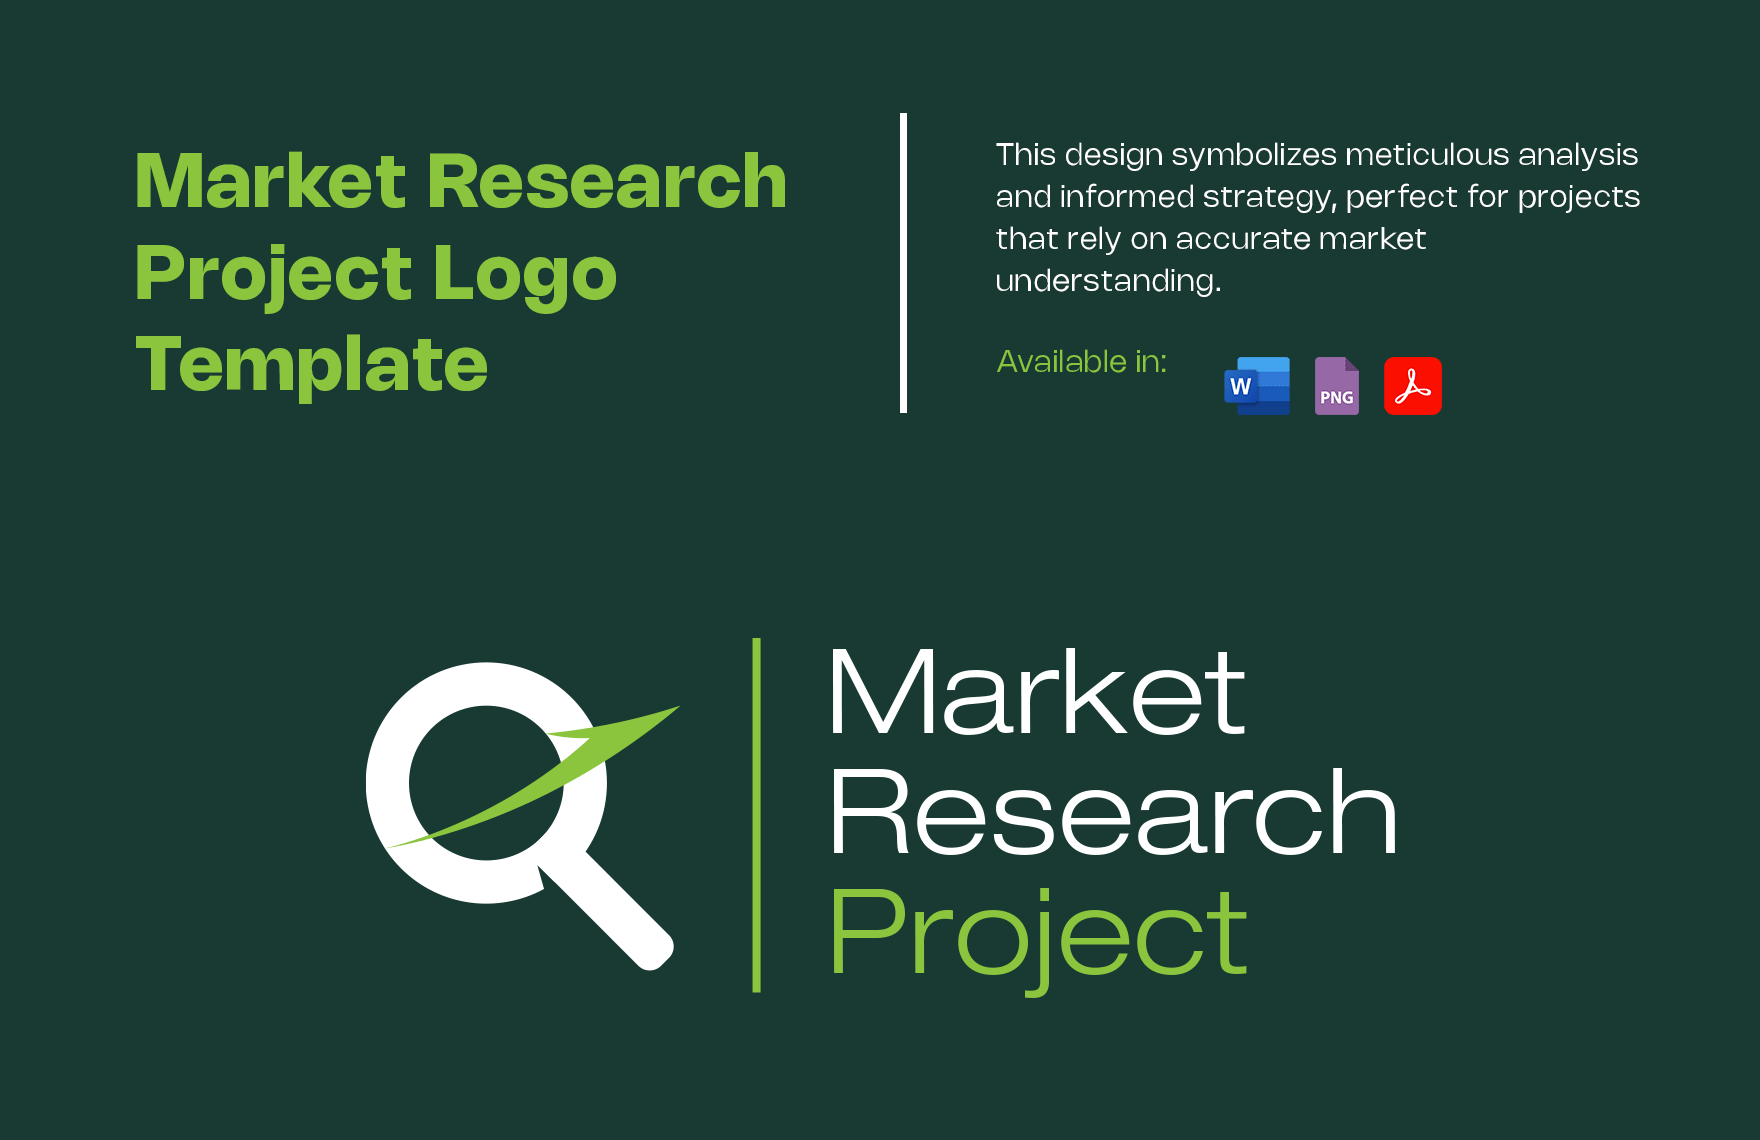 Market Research Project Logo Template